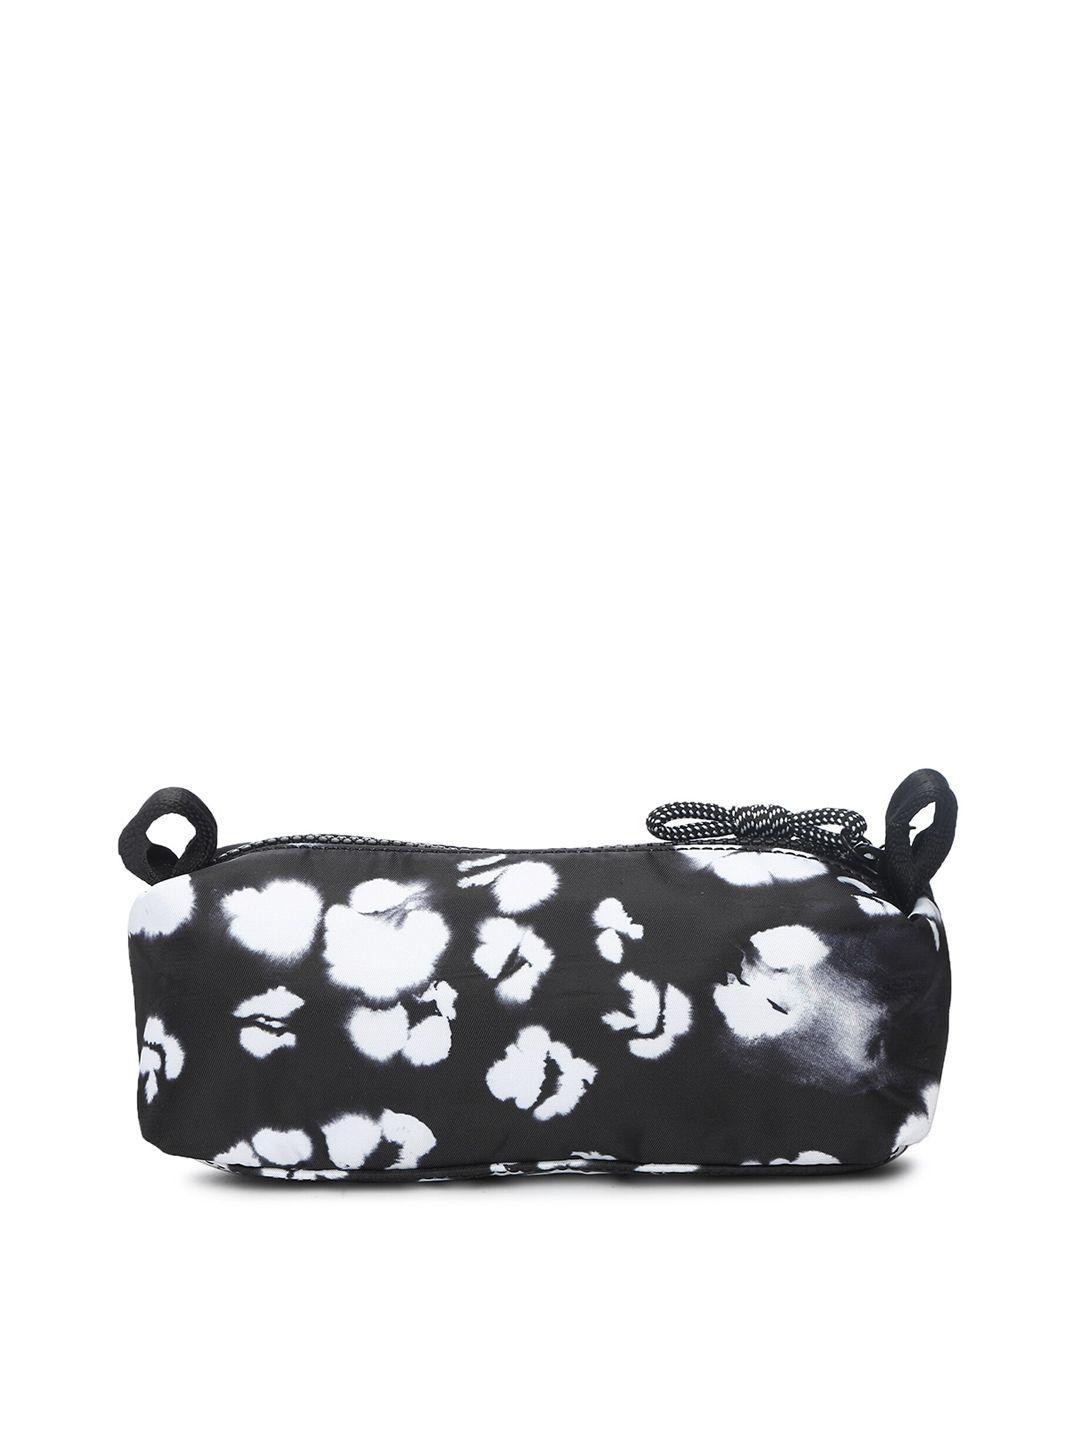 ted baker black & white printed leather purse